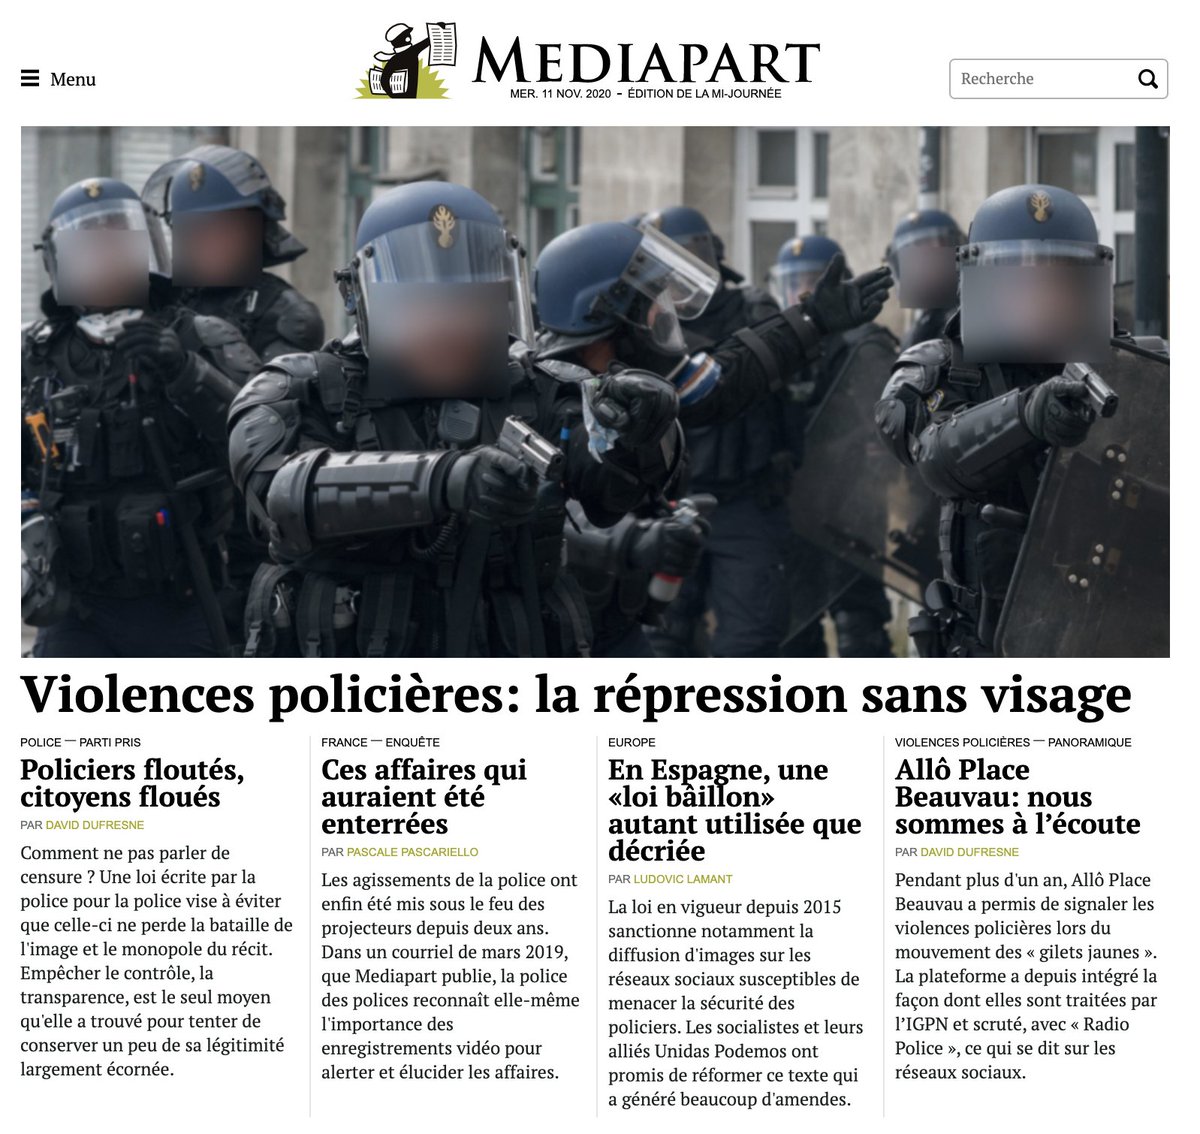  @davduf for  @Mediapart writes: "How can we not speak of censorship? A law written by police for police that aims to protect it from losing a monopoly of the narrative. To curtail control, transparency, is the only means it has found to conserve its largely eroded legitimacy."